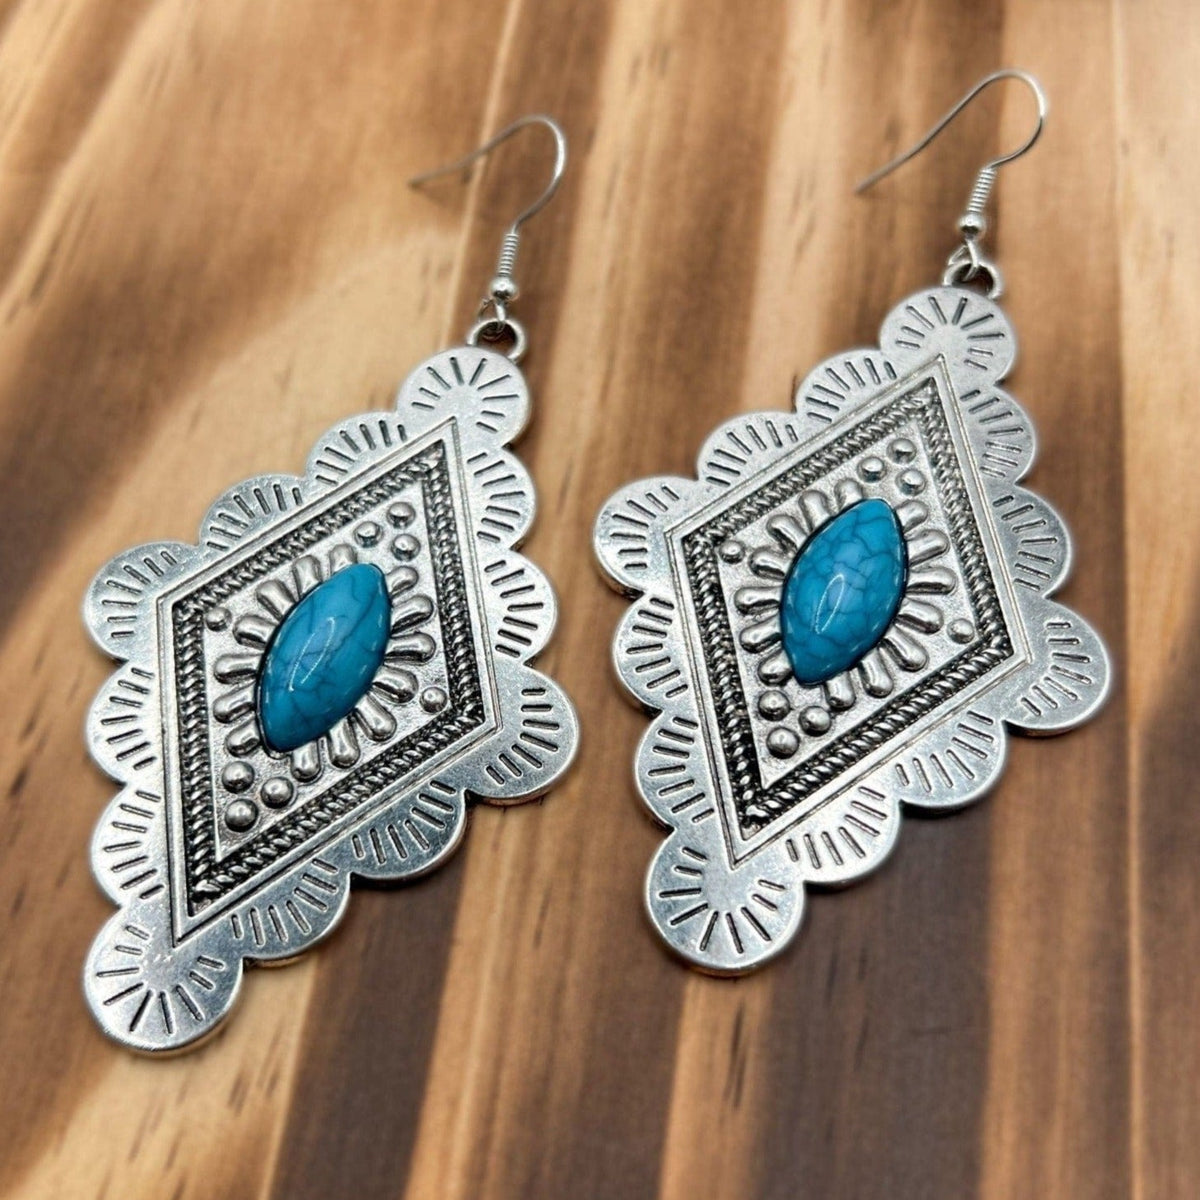 West Ways Silver and Turquoise Statement Earrings Earrings TheFringeCultureCollective